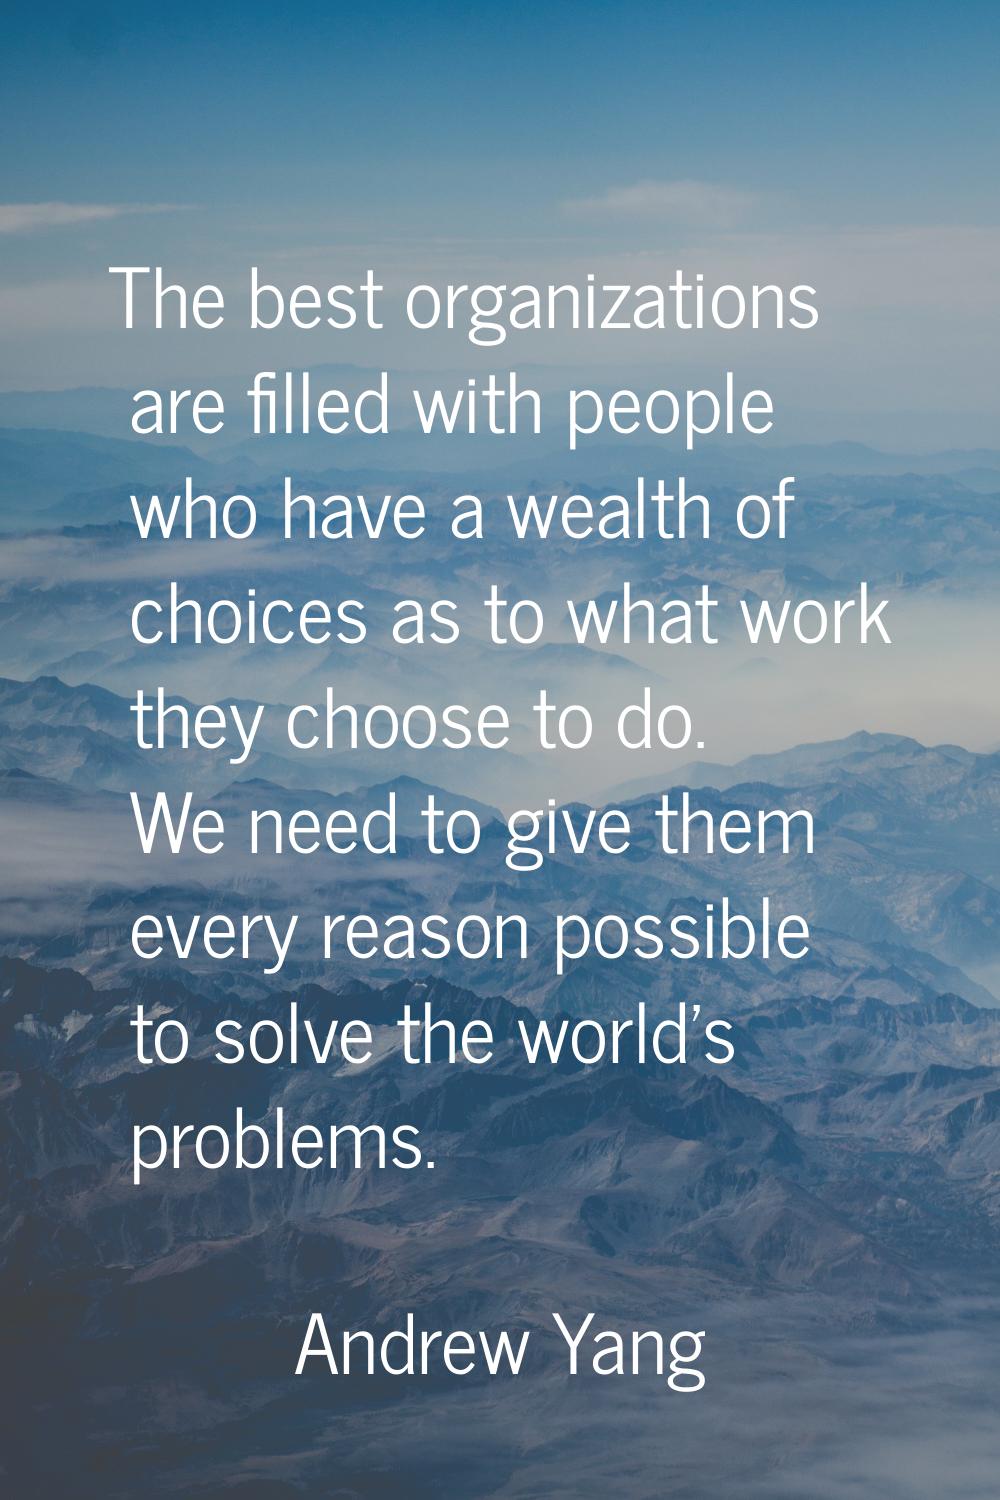 The best organizations are filled with people who have a wealth of choices as to what work they cho